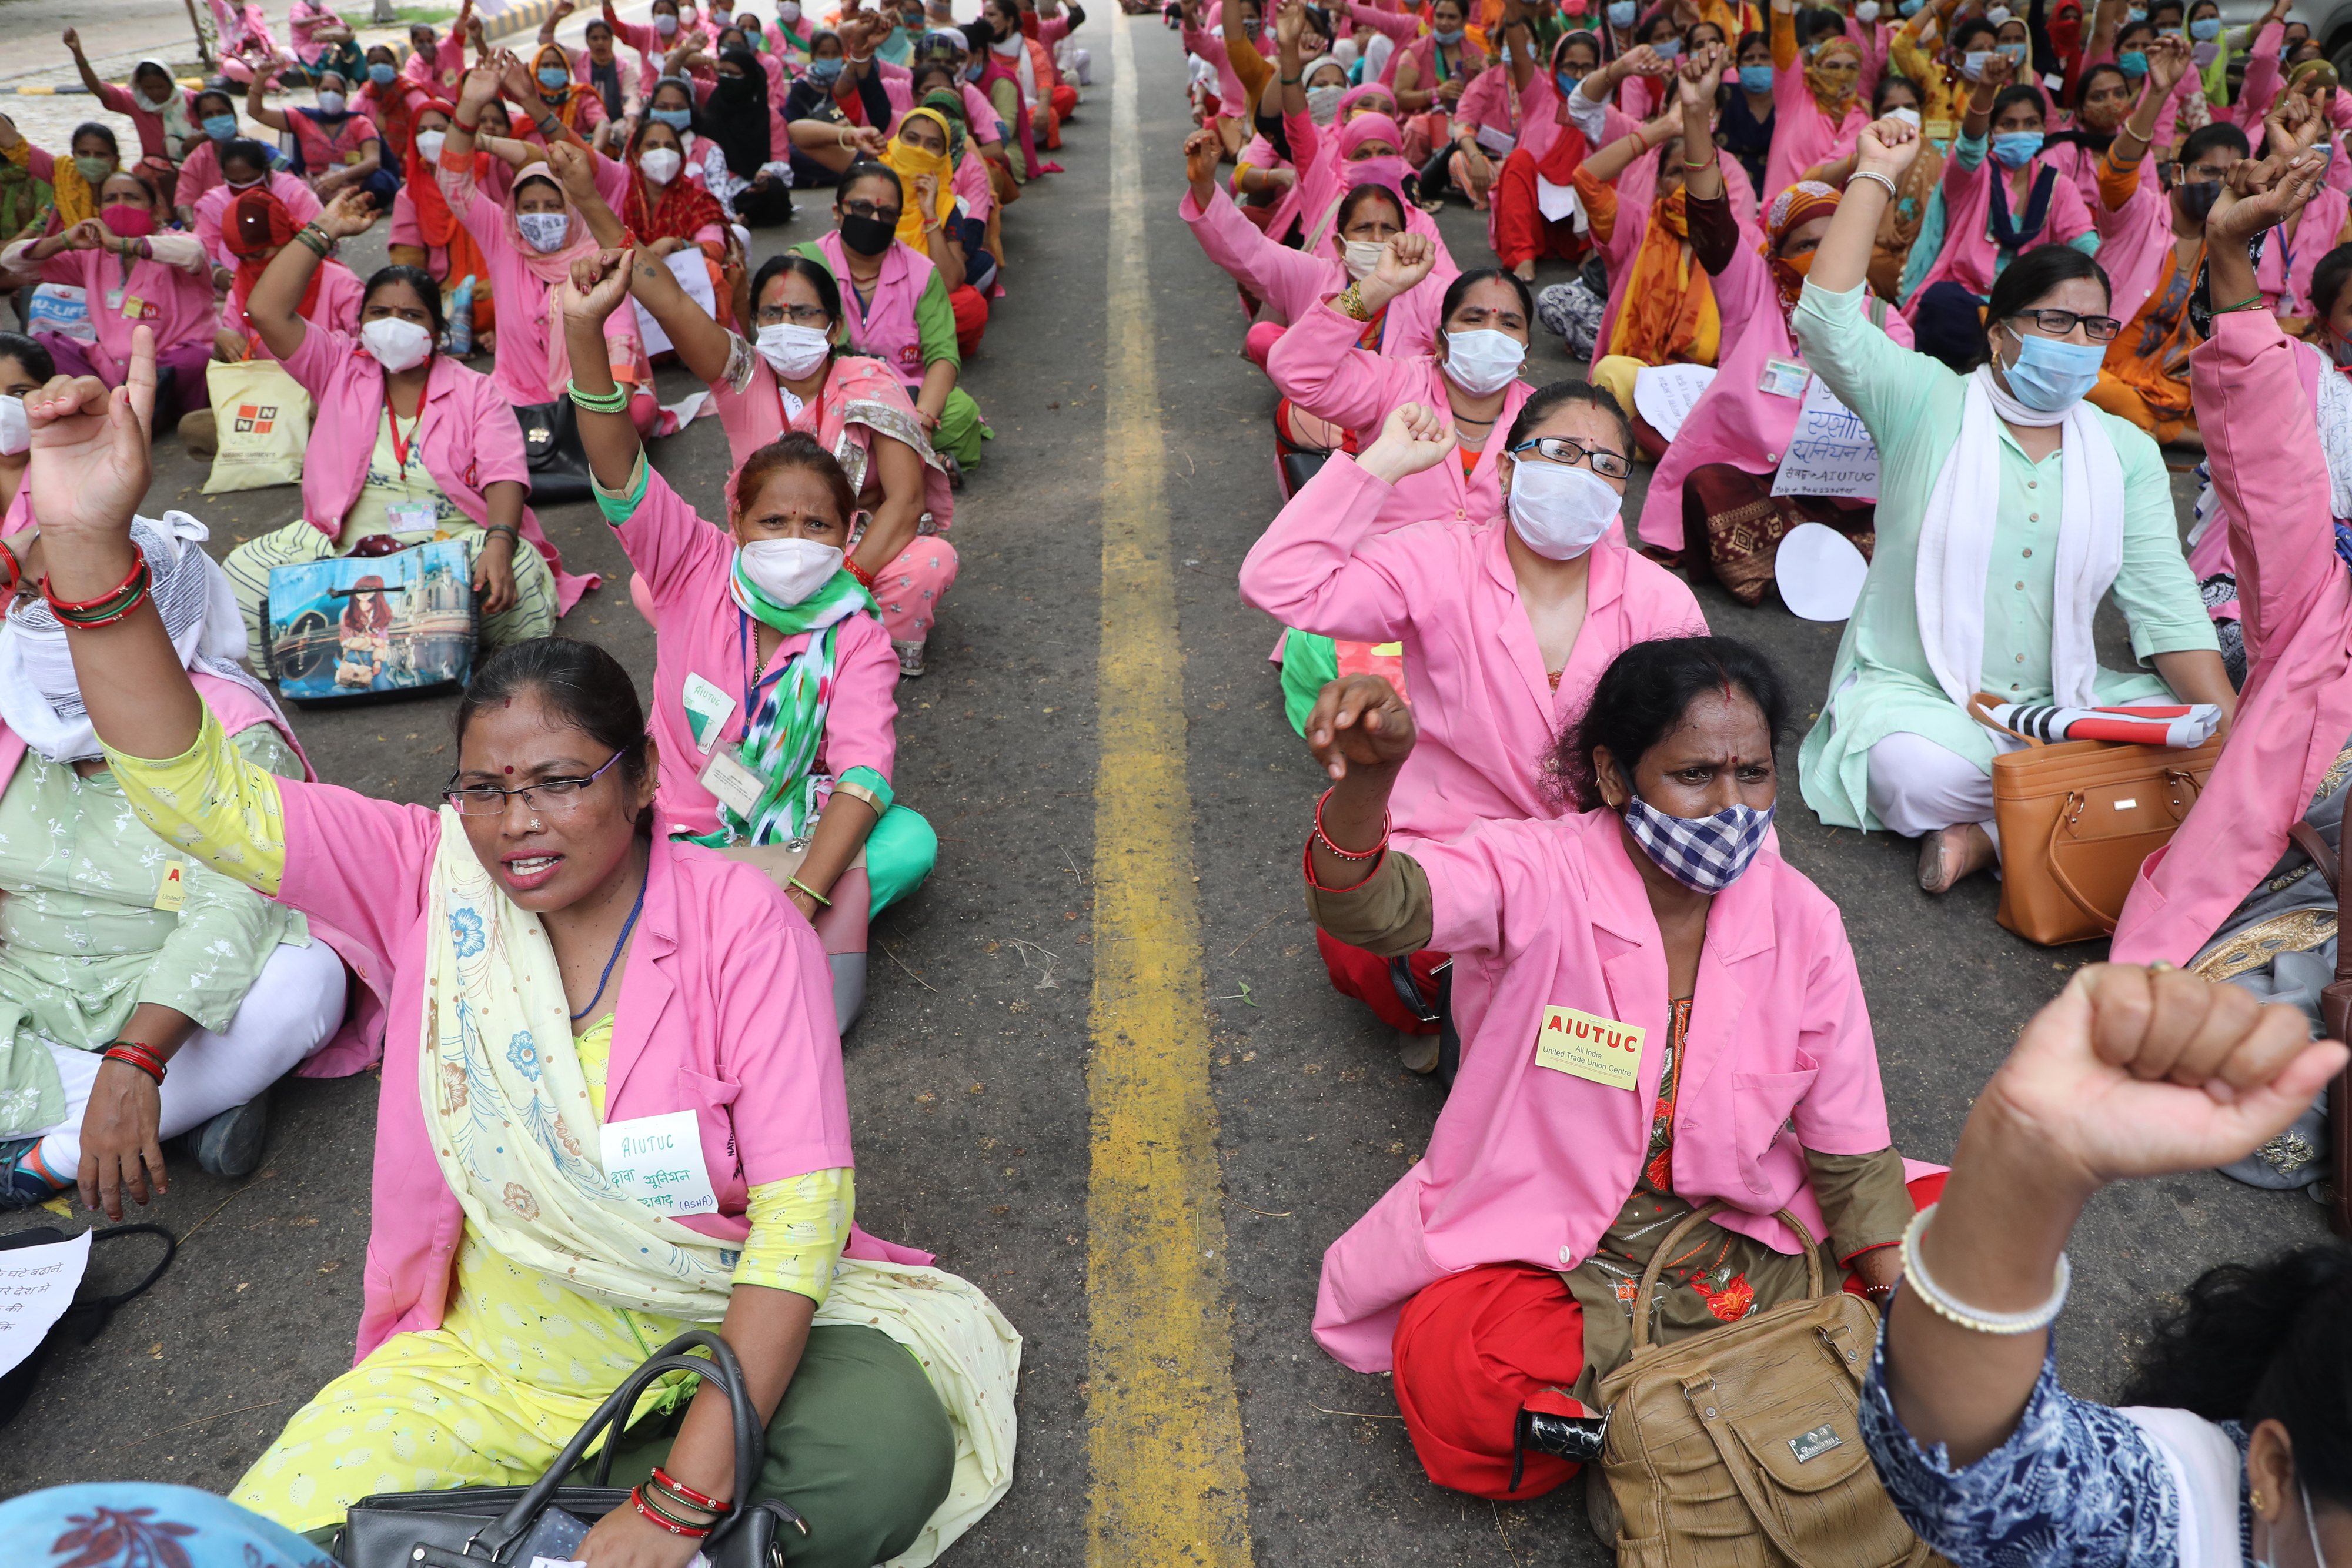 New Delhi, Aug. 9, 2020. ASHAs protest in New Delhi, demanding better pay and recognition. Photo by T. Narayan/Bloomberg via Getty Images